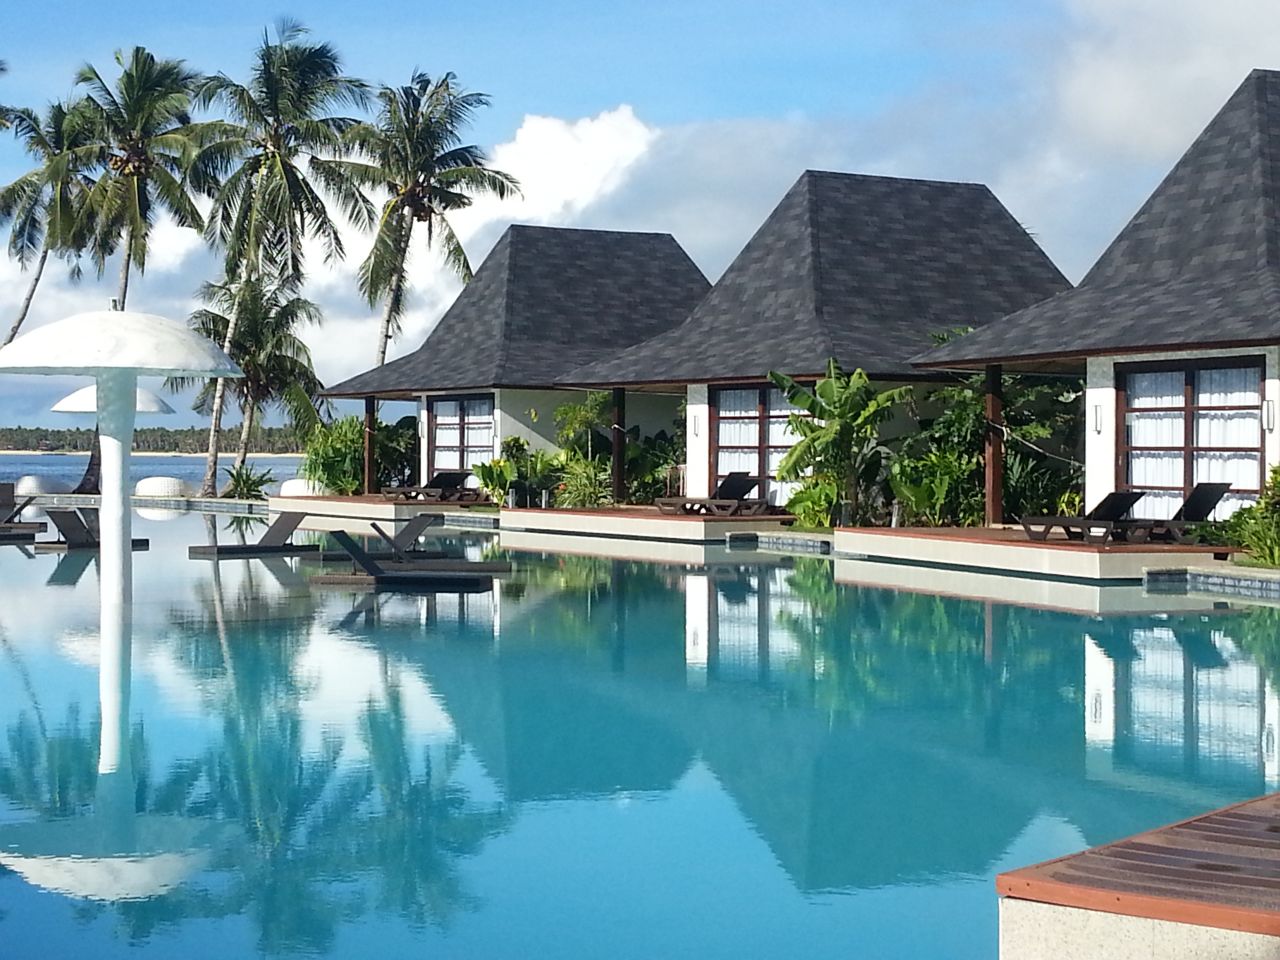 <strong>Siargao Bleu Resort & Spa, Siargao Island:</strong> A personal butler, airport transfers, poker nights, an outdoor cinema and a gorgeous pool -- Siargao Bleu Resort and Spa is a cut above the typical beach retreat.